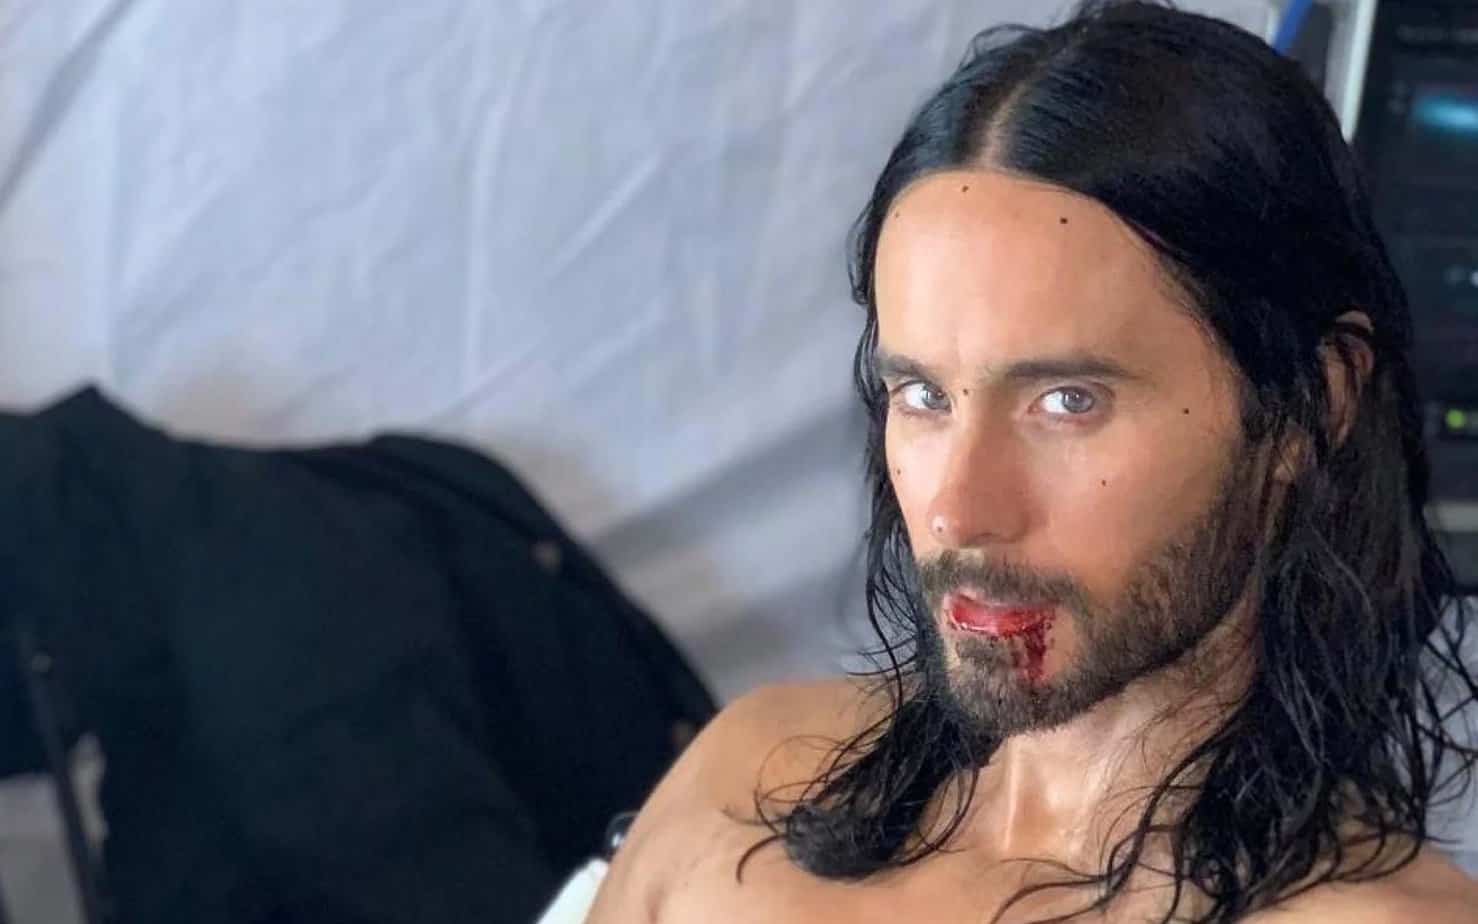 Jared Leto Nearly Died, shares a harrowing video